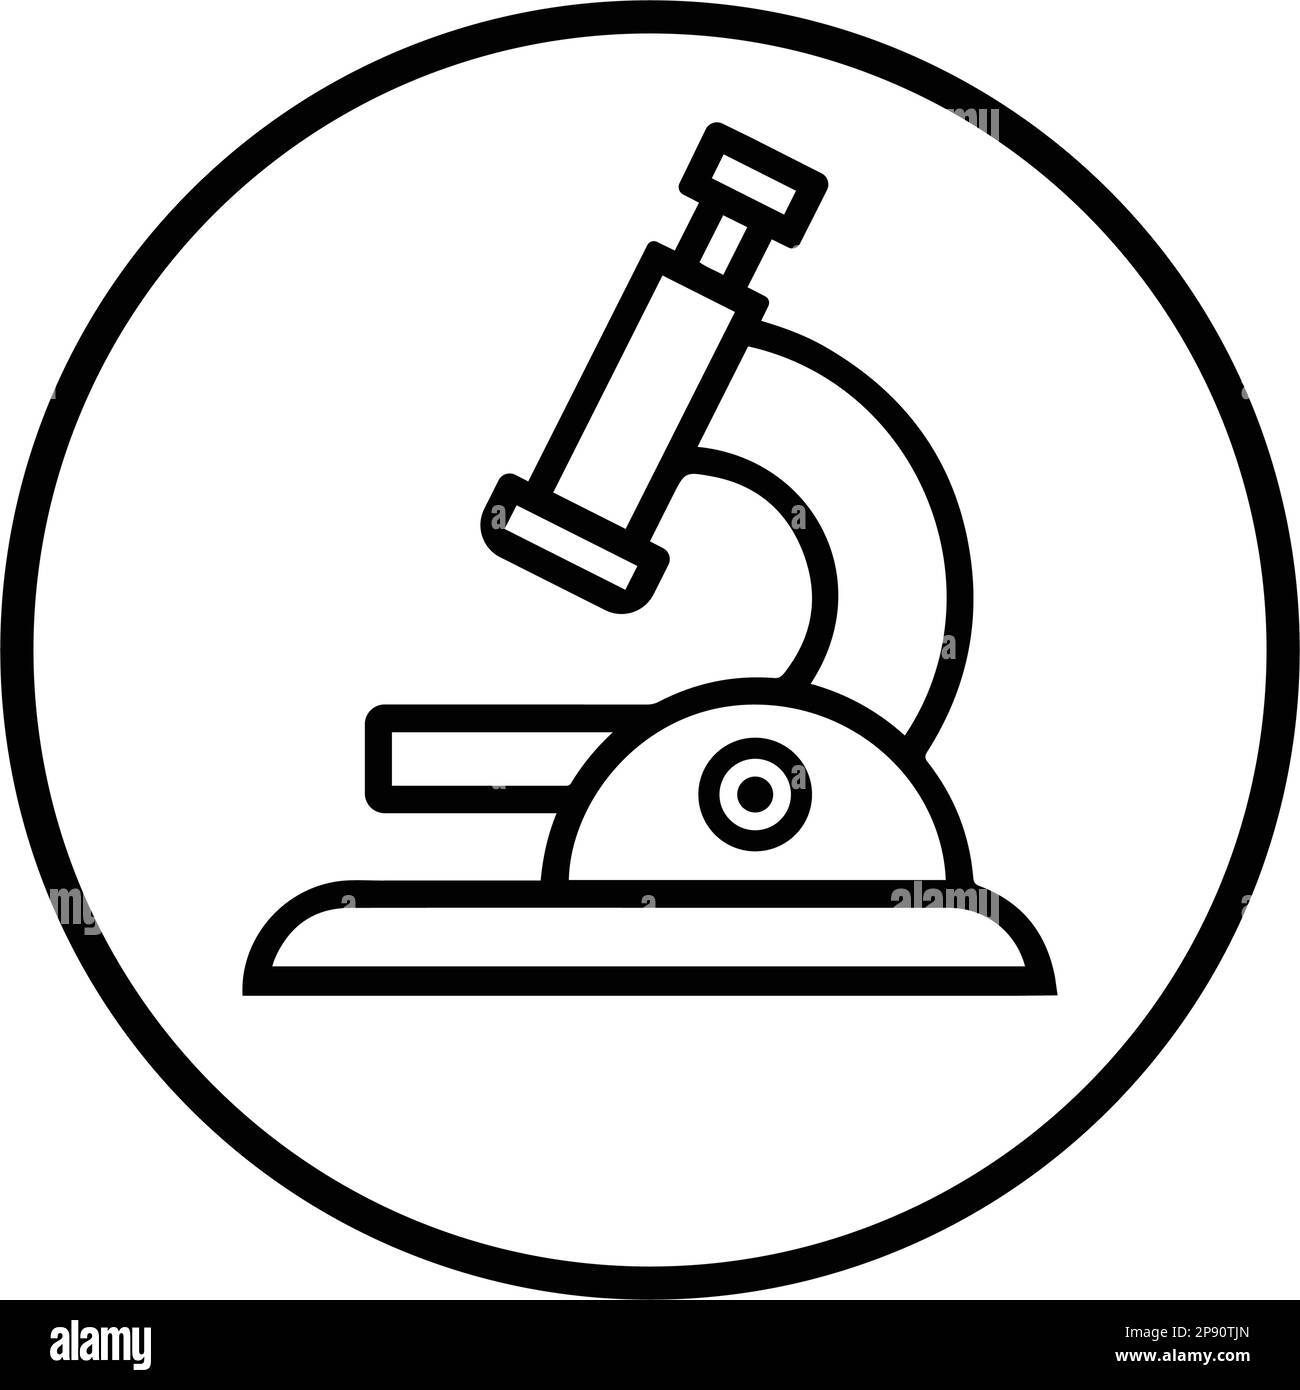 Microscope icon. Beautiful design and fully editable vector for commercial, print media, web or any type of design projects. Stock Vector